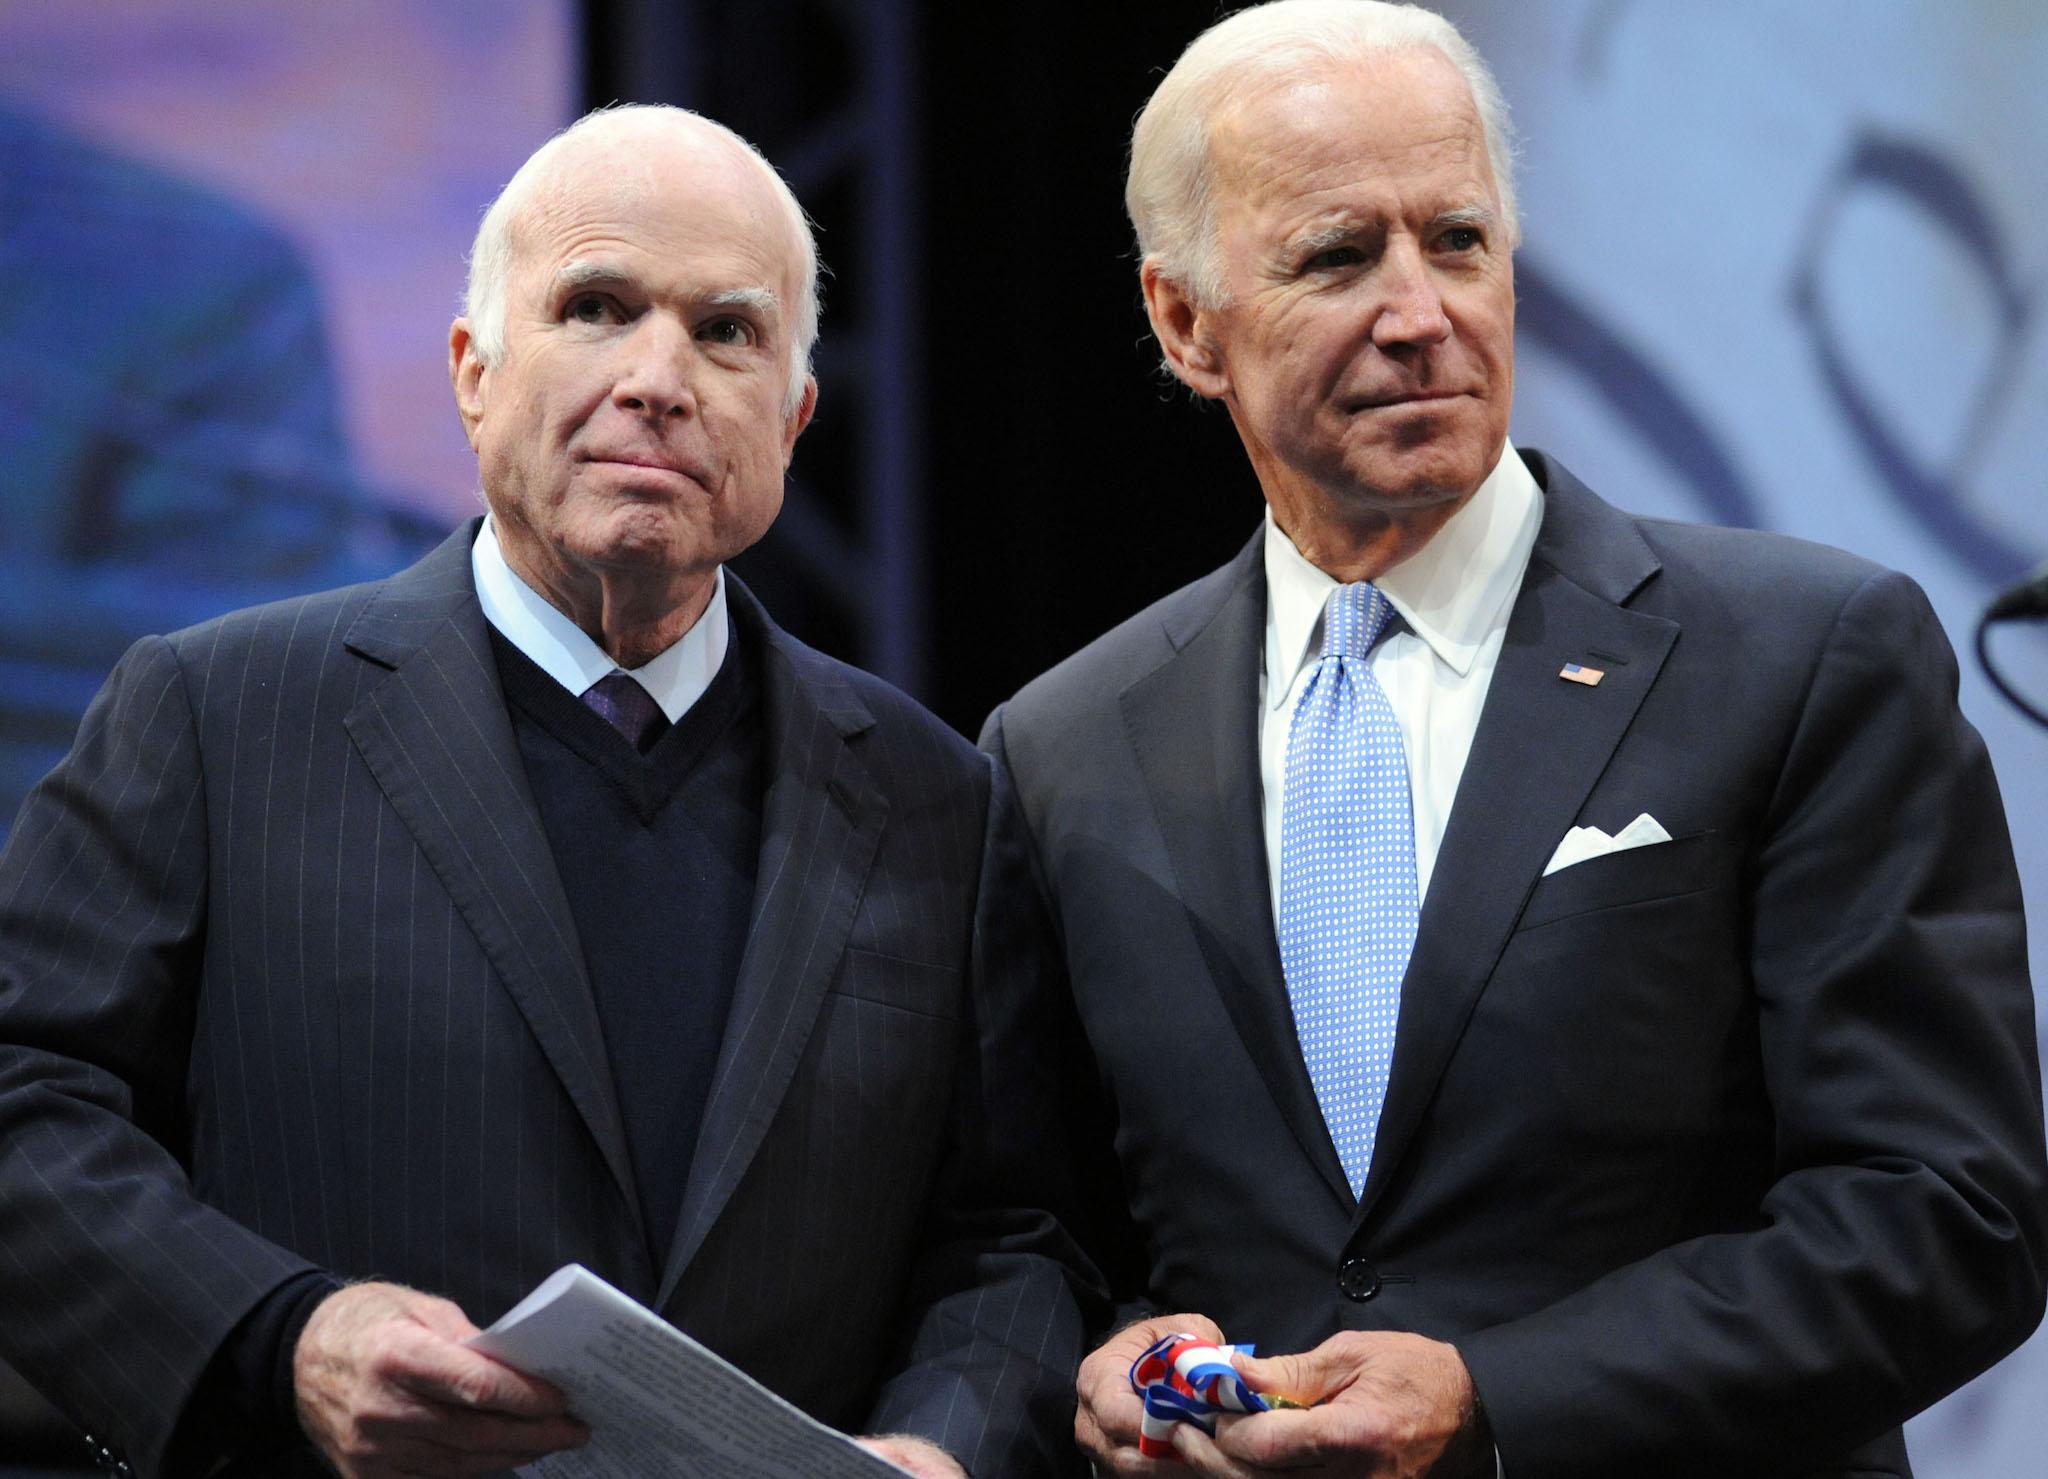 John McCain receives the the 2017 Liberty Medal from former Vice President Joe Biden at the National Constitution Center